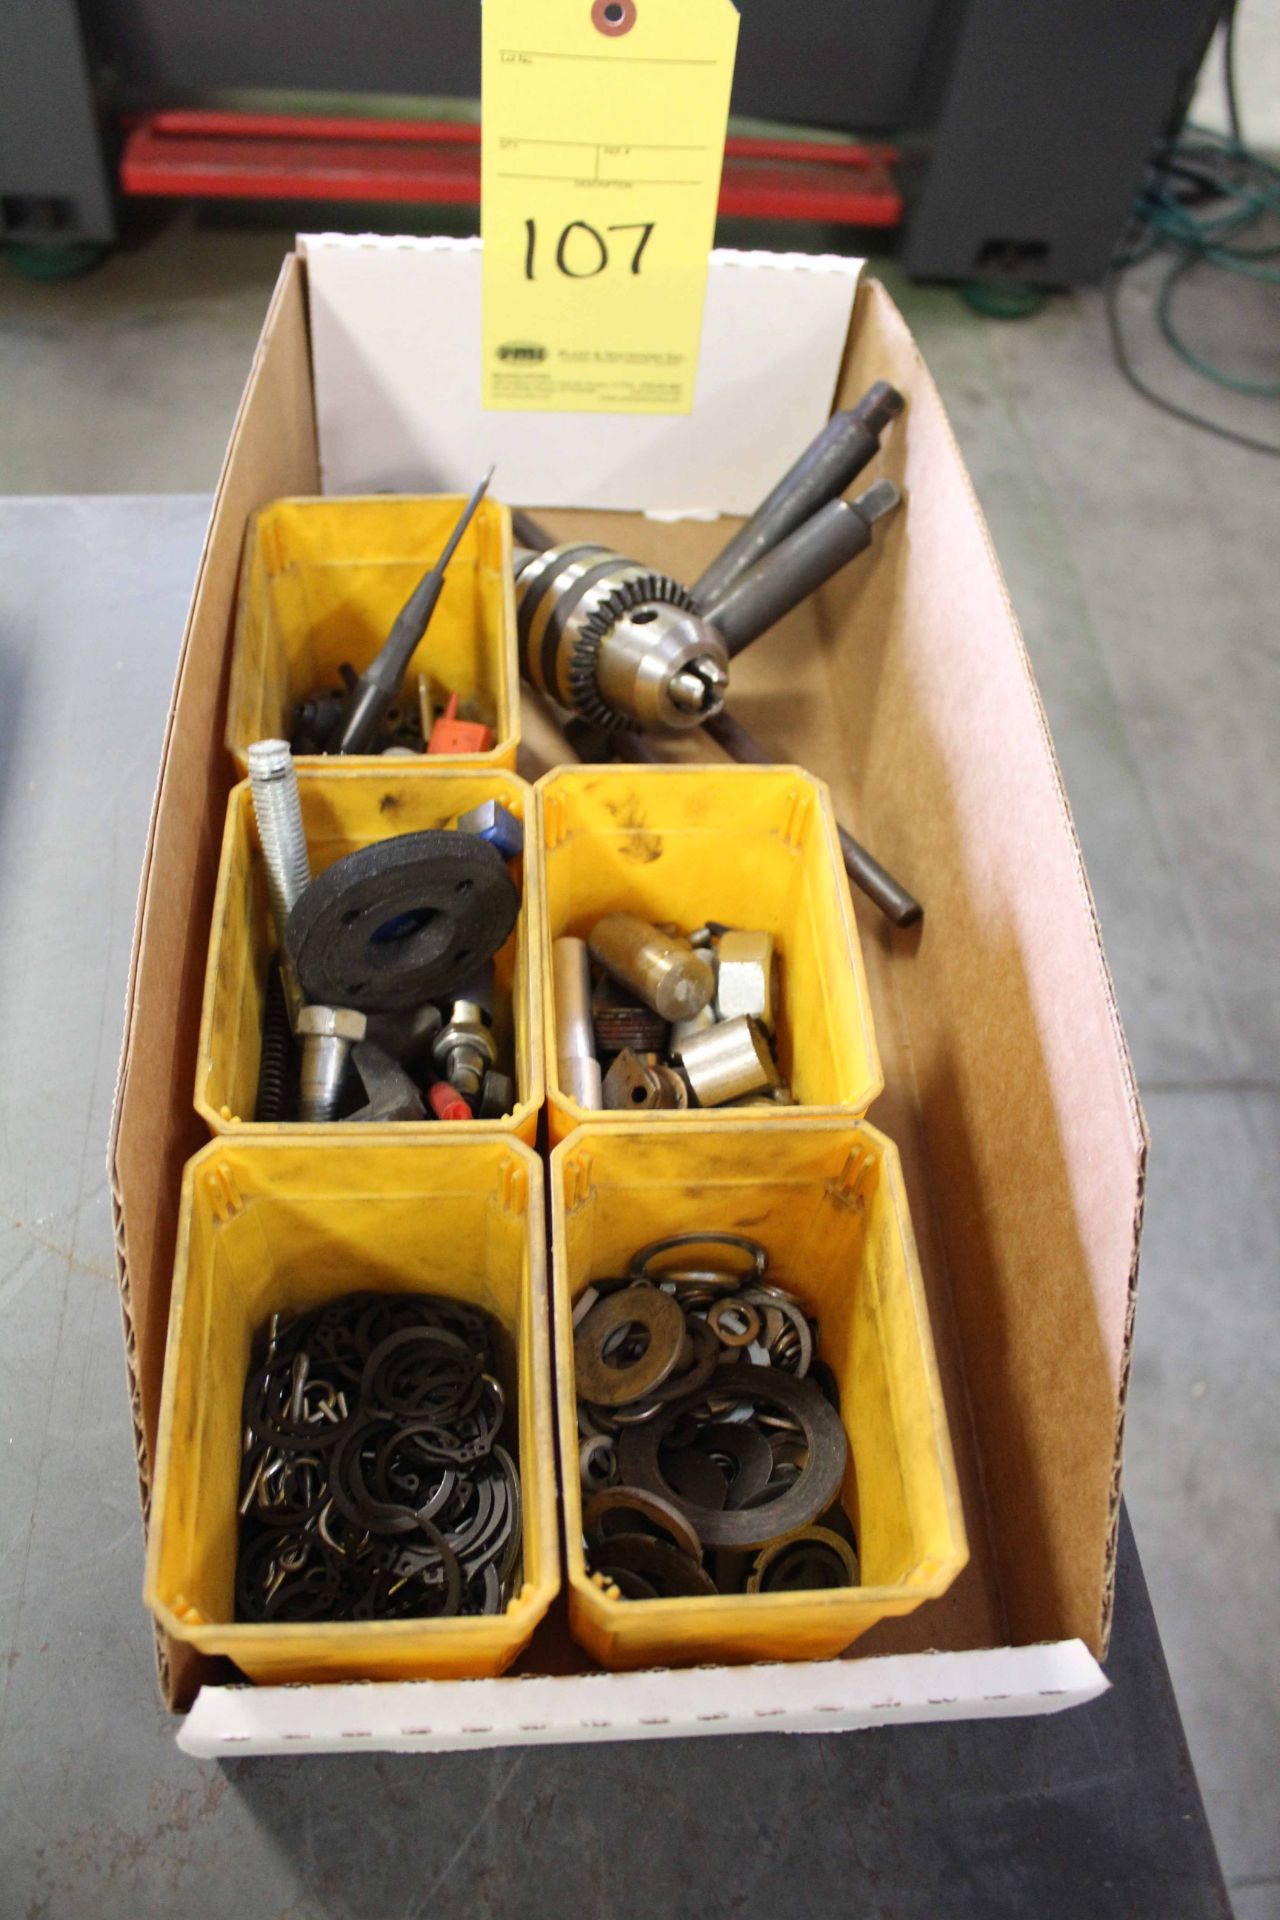 LOT CONSISTING OF: replacement screws, T-handles & chuck (in one box)